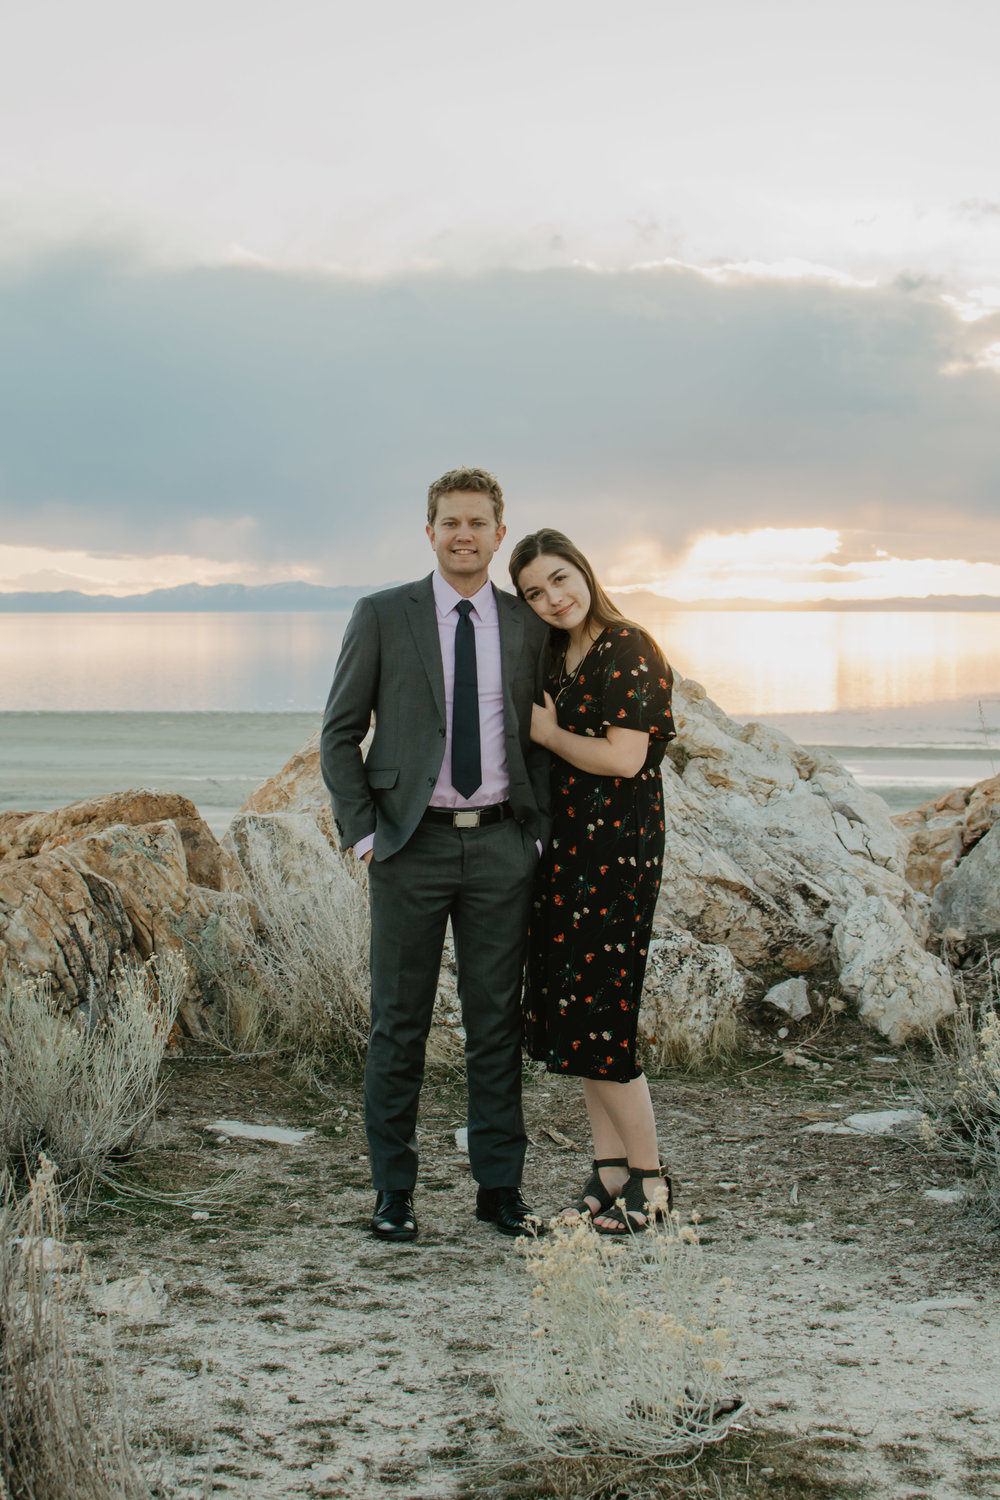 beautiful sunset engagement photo with thick rain clouds in the back ground with a sun set as the woman holds her fiances arm and they both smile at the camera Jocilyn Bennett Photography | Destination Wedding Photographer | Elopement Wedding Photographer | National Park Elopement Photography | Capturing raw and genuine emotion | Utah Photographer | Utah wedding Photographer | National Park Weddings | Adventure Photographer | Antelope Island Engagements | Engagement pose ideas | Utah engagement photography | Engagement Pose Ideas | Candid Engagements |